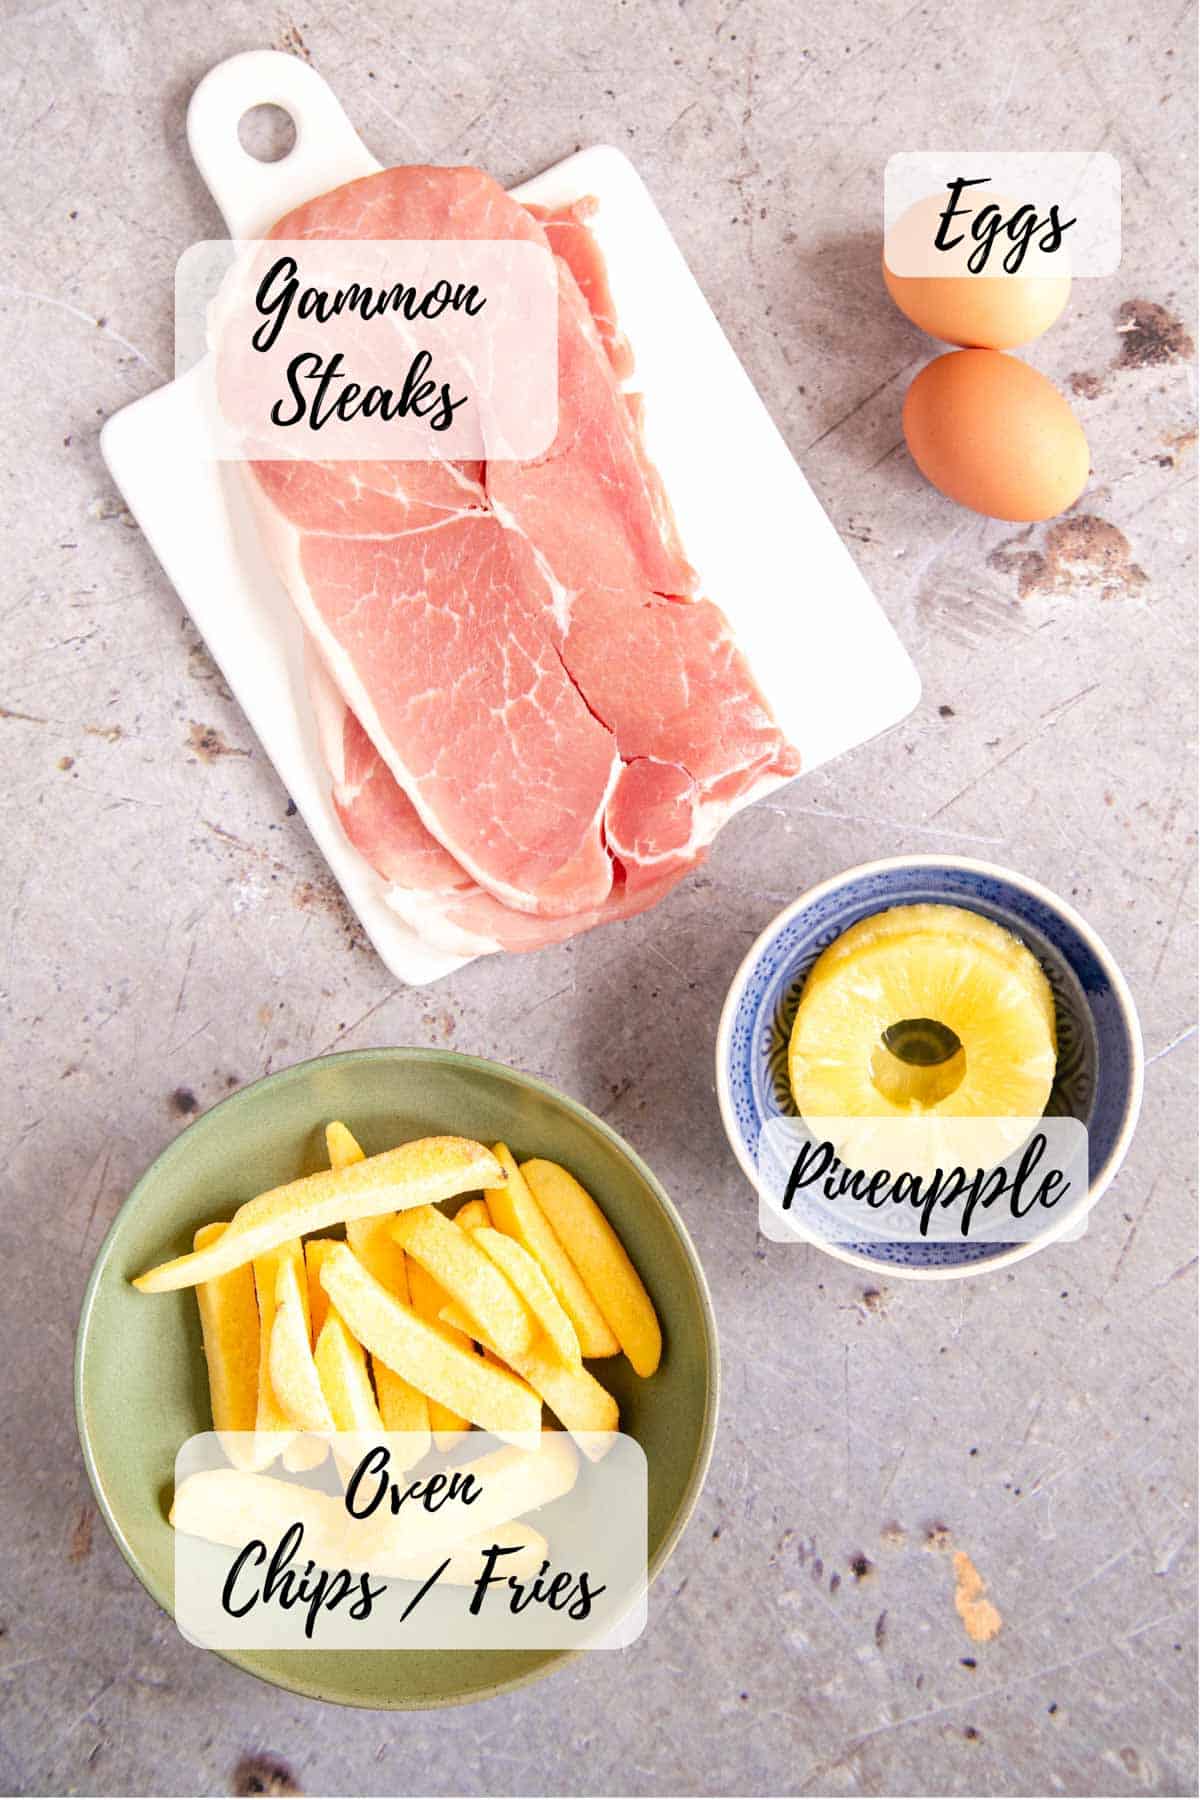 Ingredients for pub style ham egg and chips with pineapple text overlay labels each one